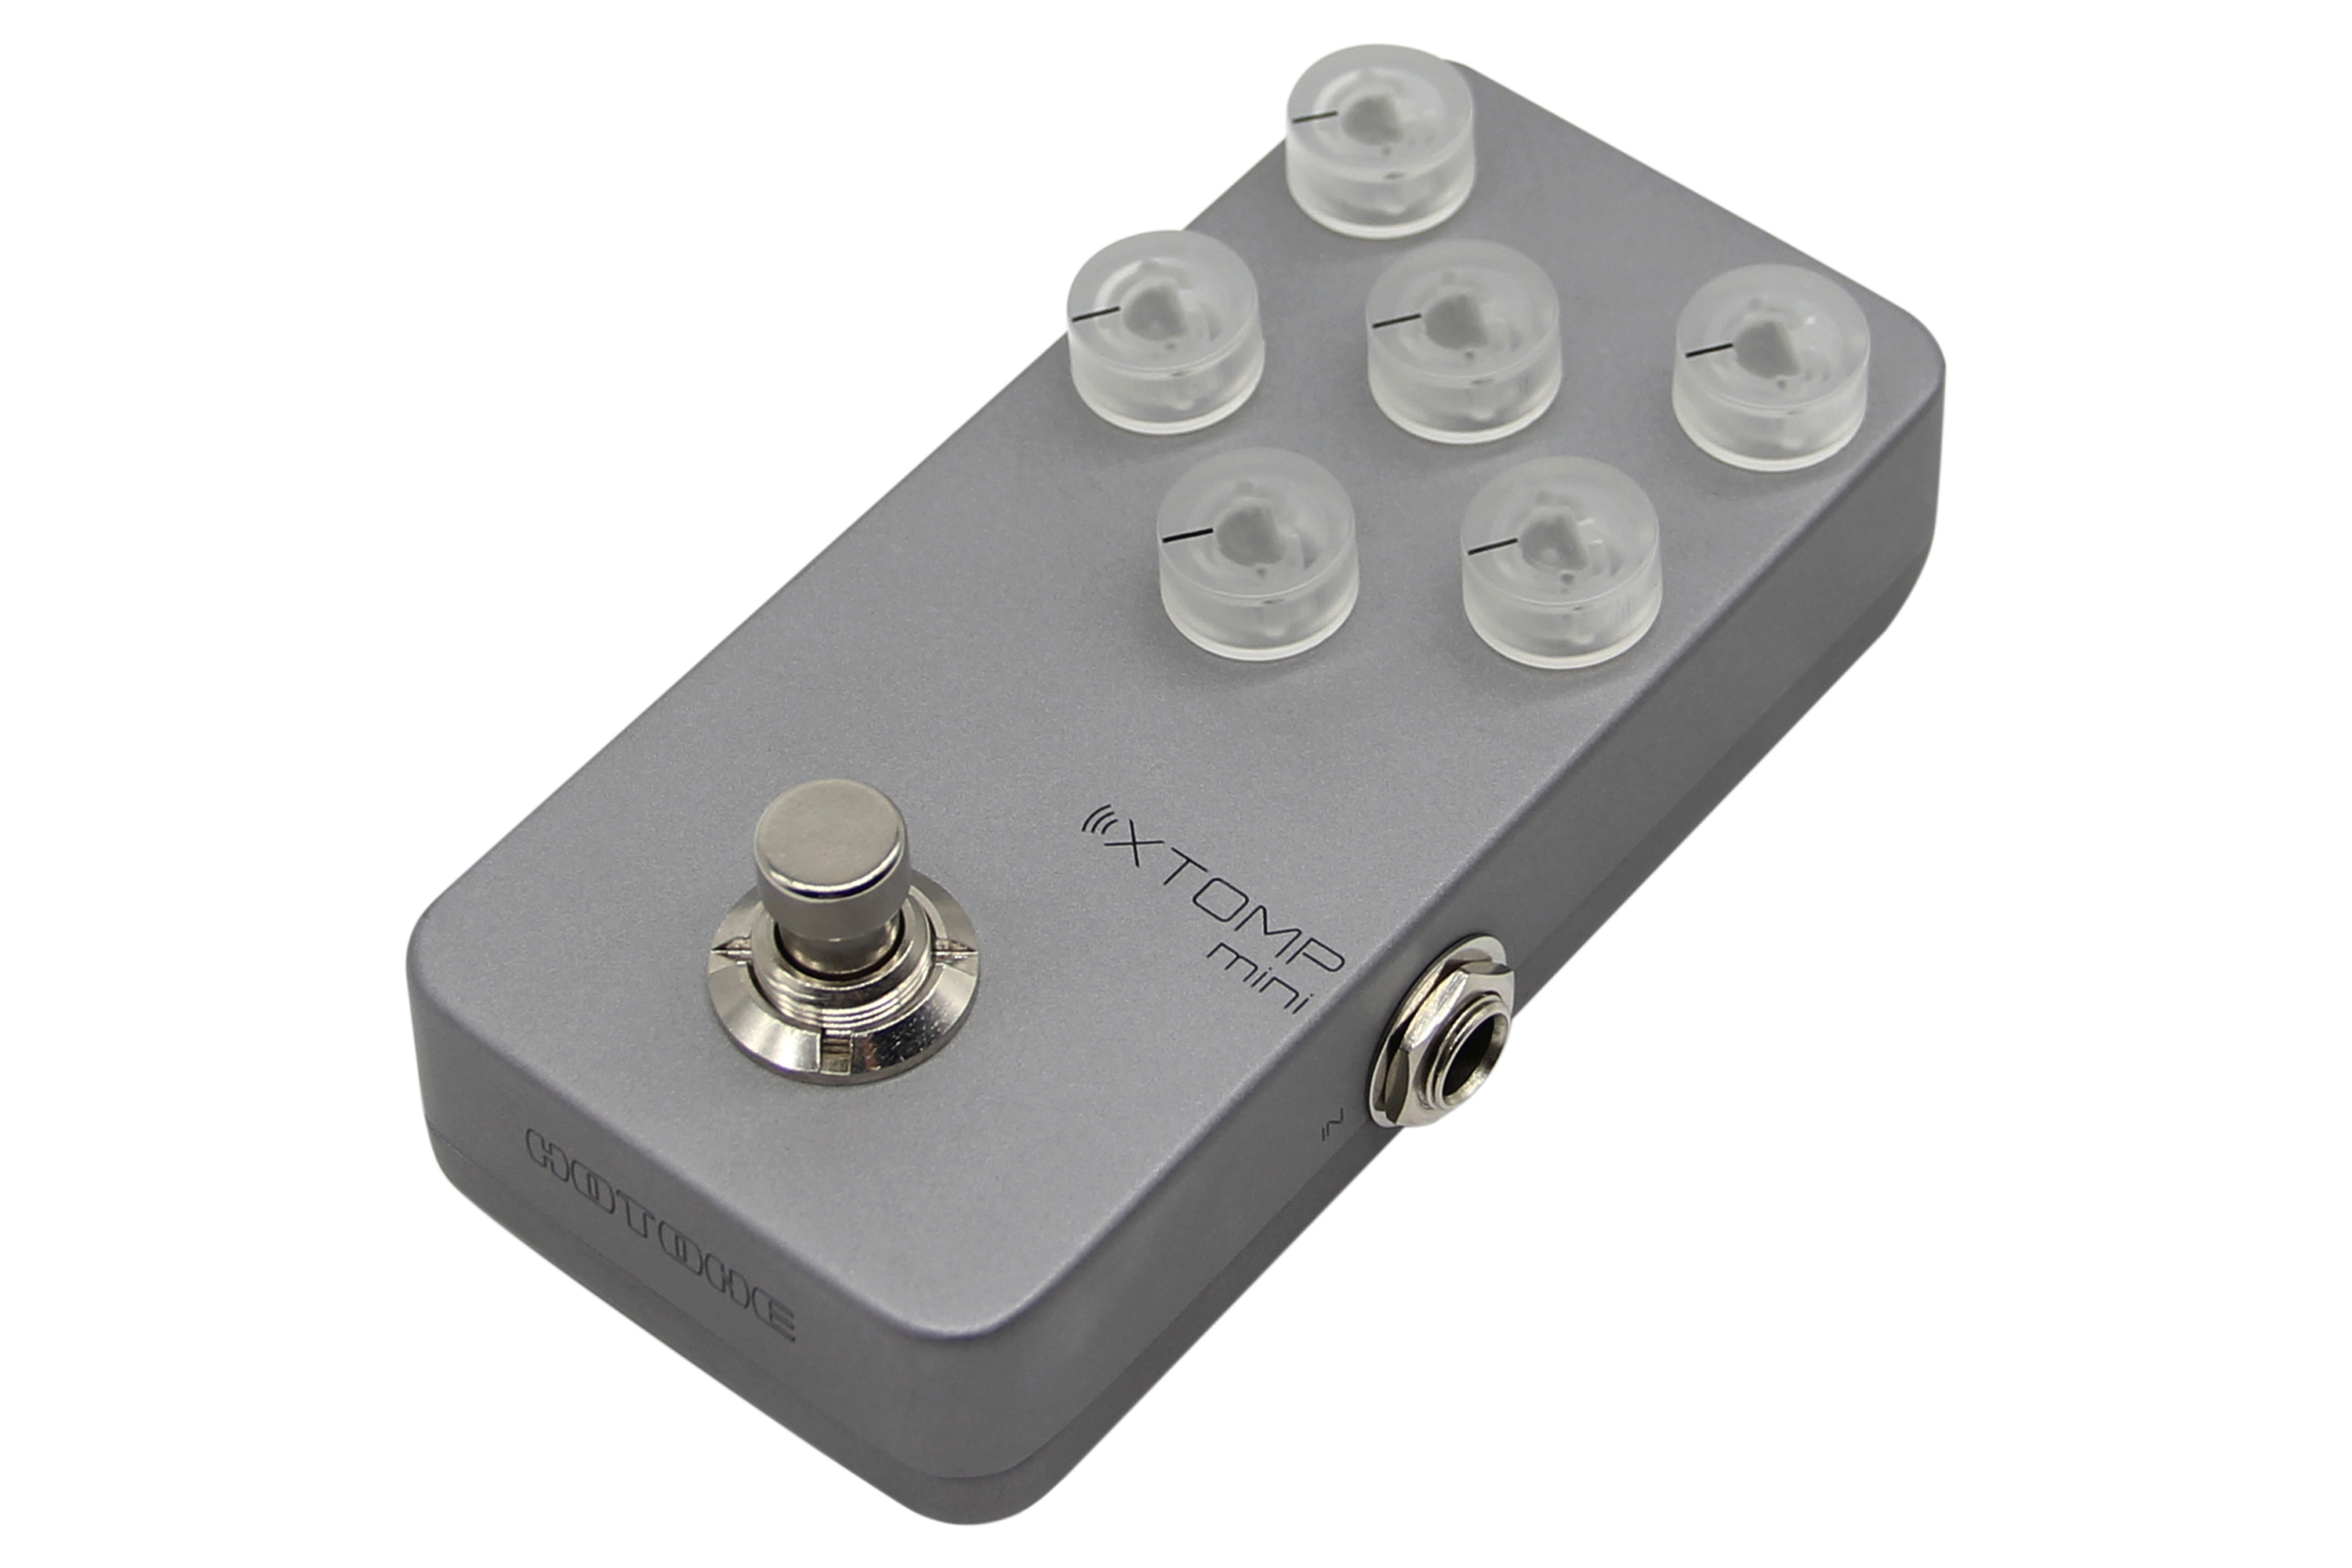 Hotone's New XTOMP mini: 140 Classic, Vintage & Modern Effects for 